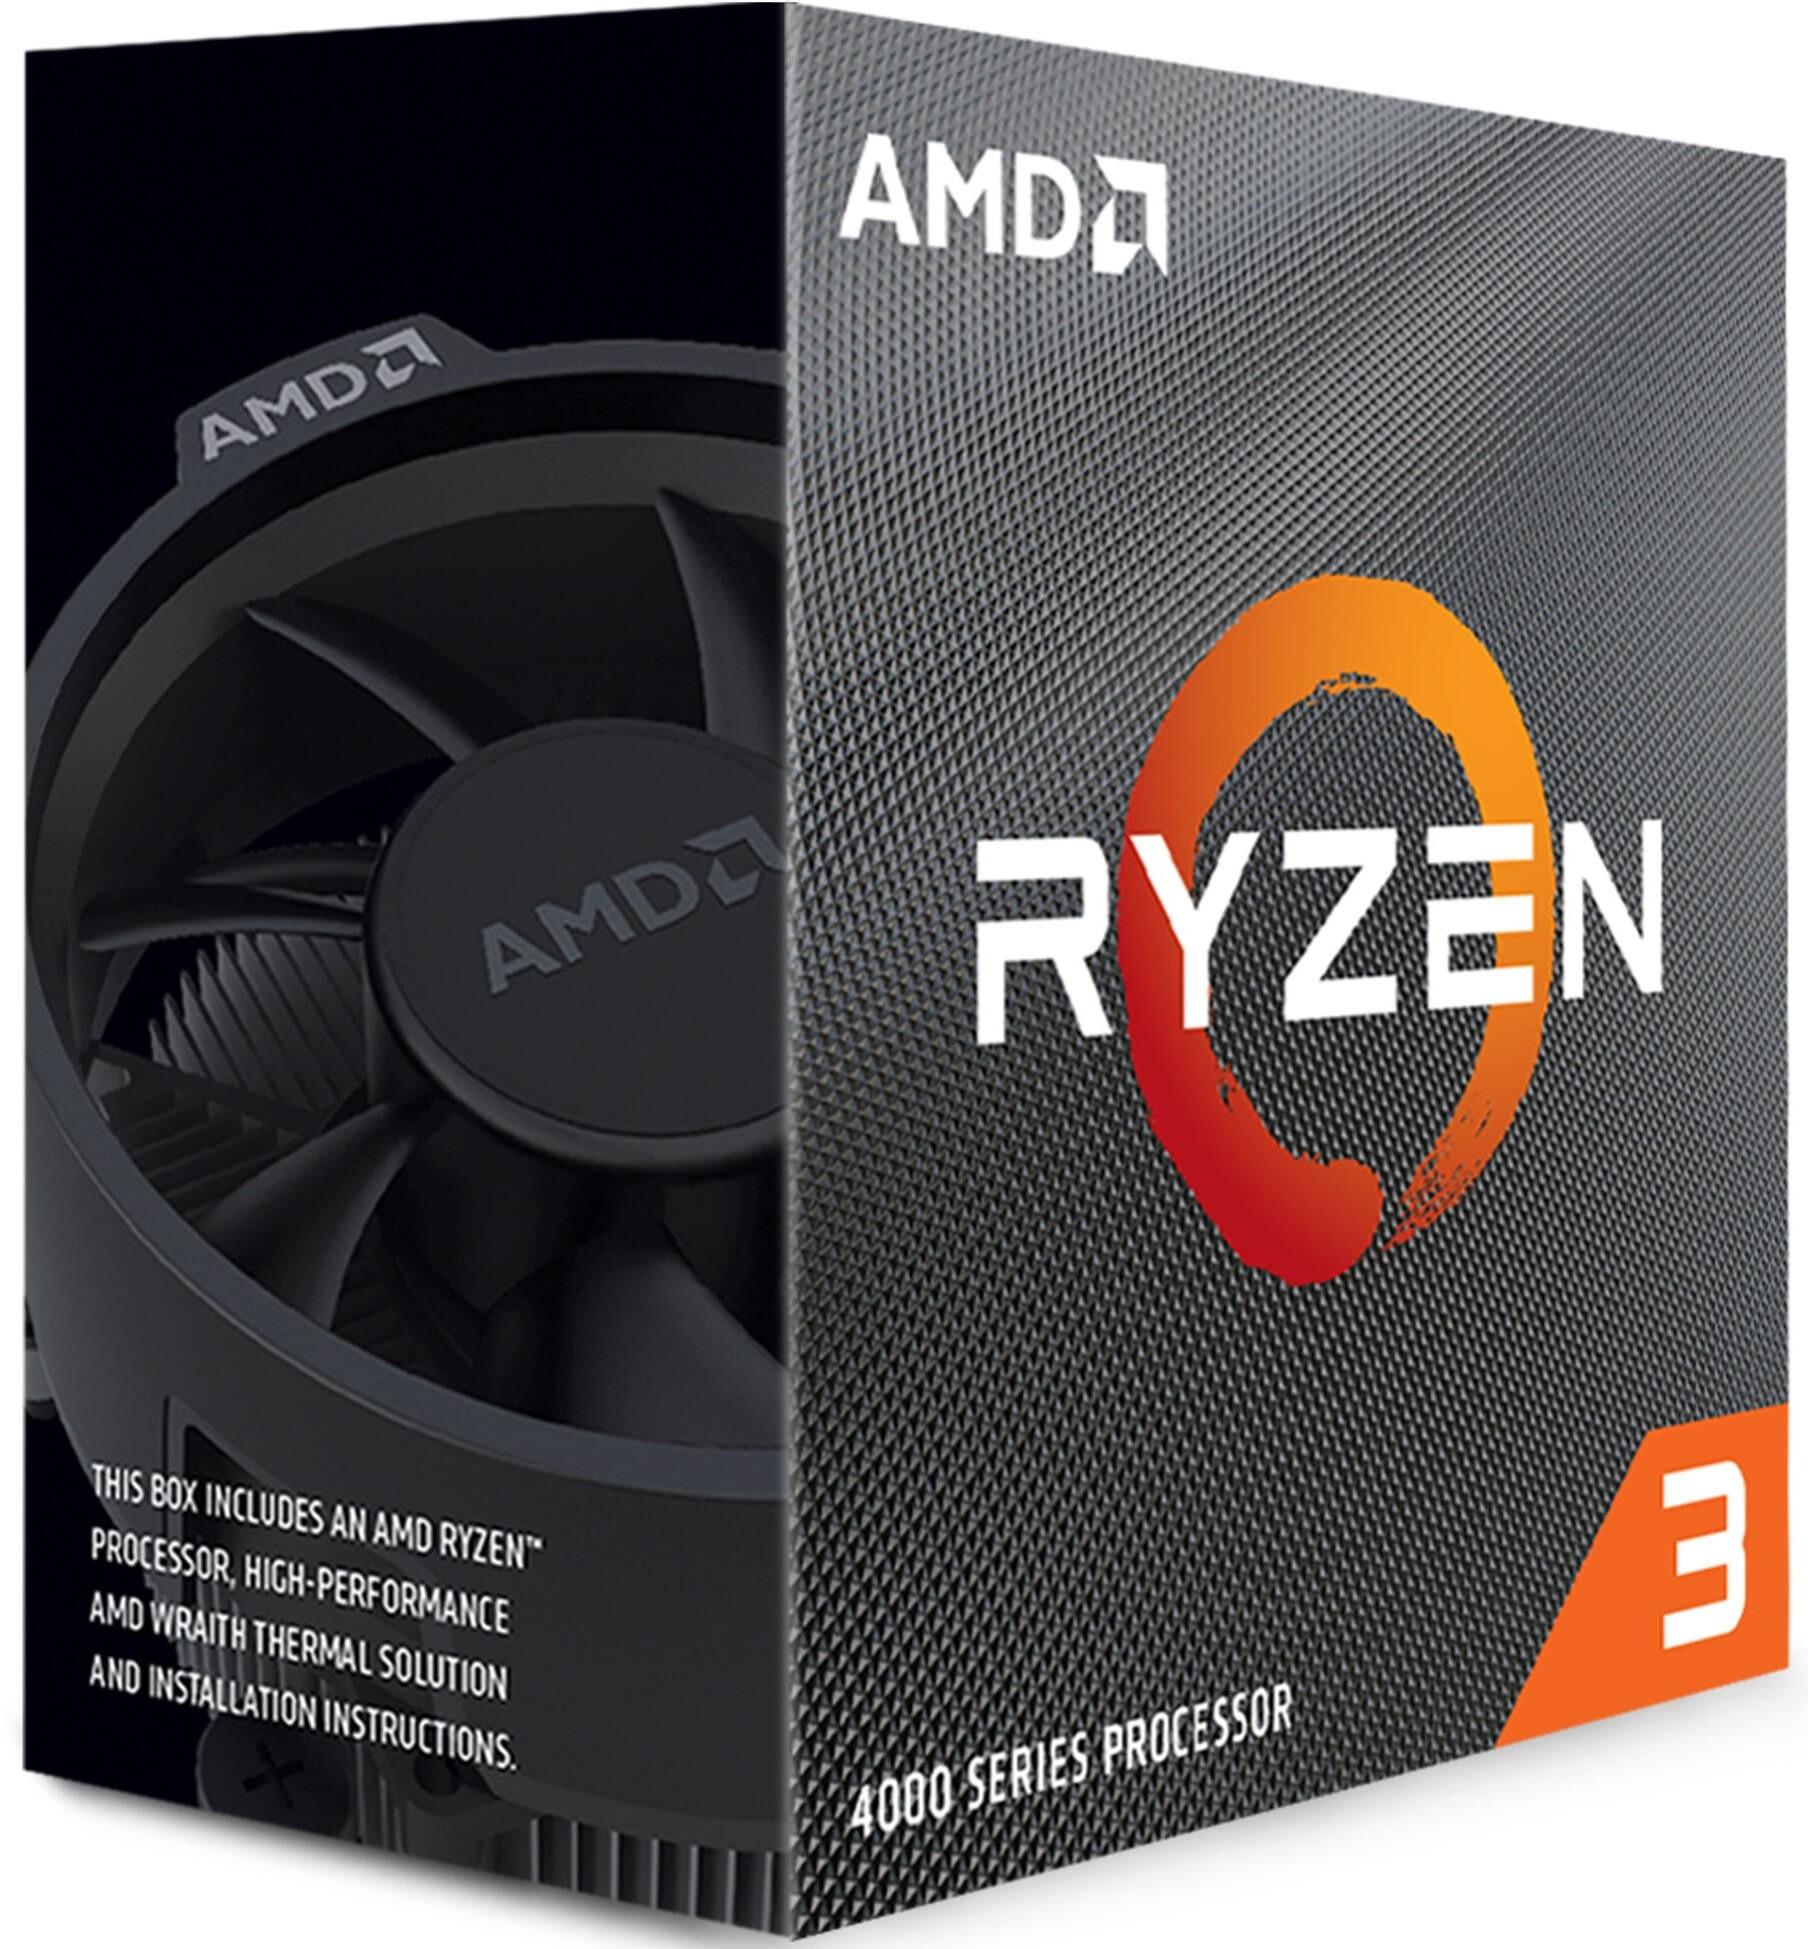 Процесор AMD Ryzen 3 4100, AM4 Socket, 4 Cores, 8 Threads, 3.8GHz(Up to 4.0GHz), 6MB Cache, 65W, BOX-1